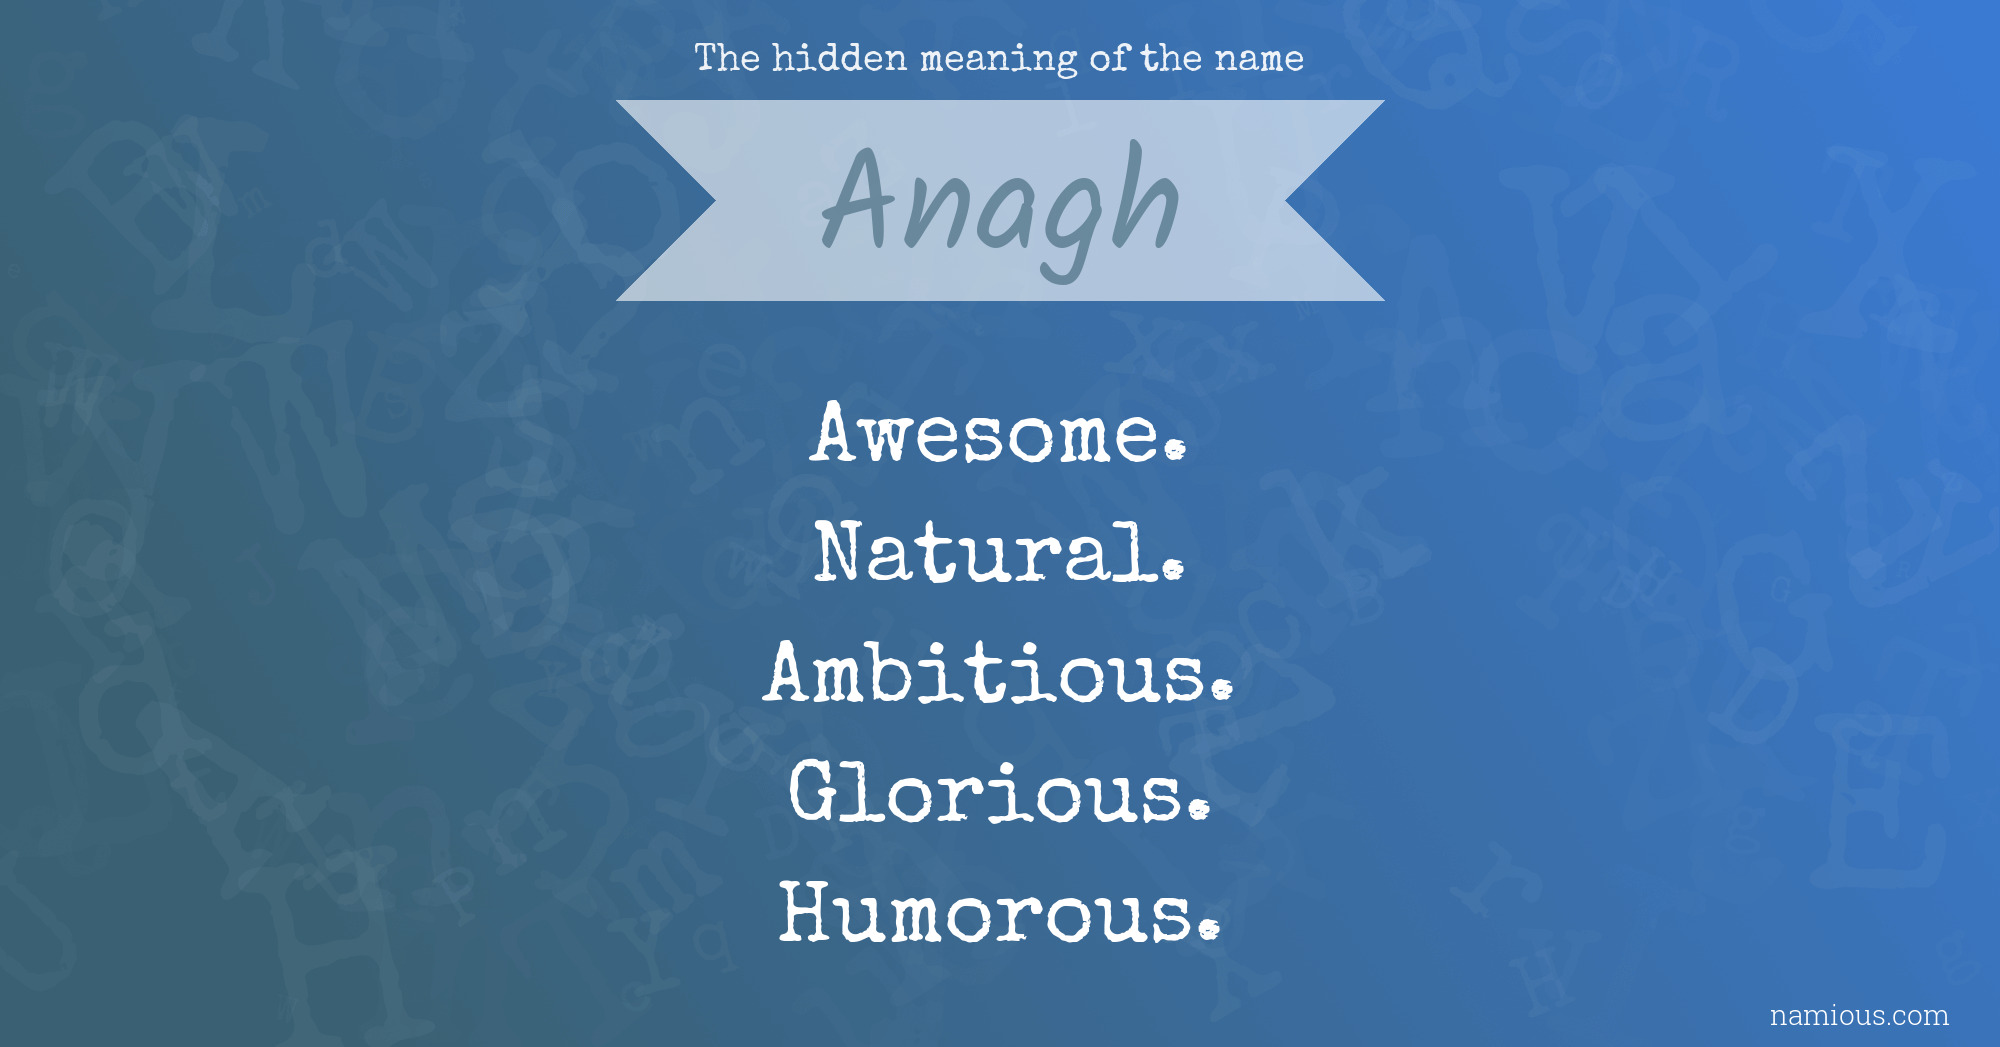 The hidden meaning of the name Anagh